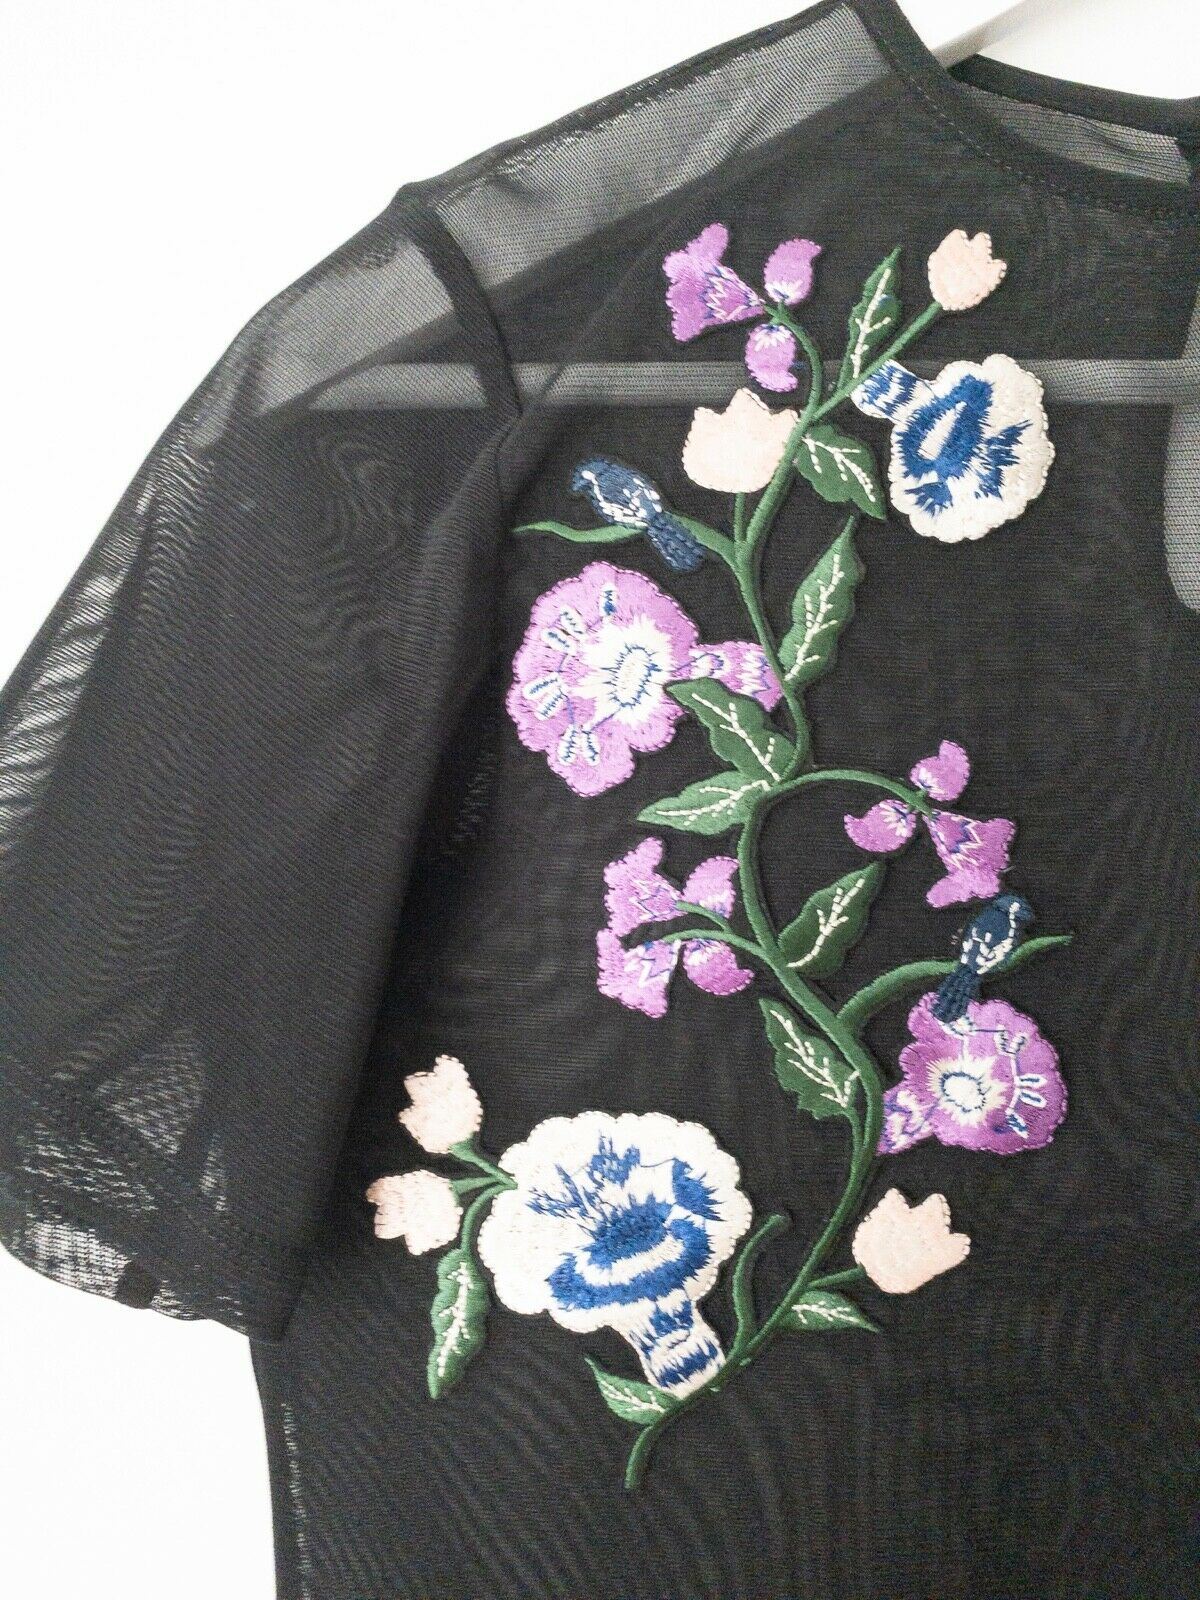 Sheer Mesh Top Embroidered Floral Size 10